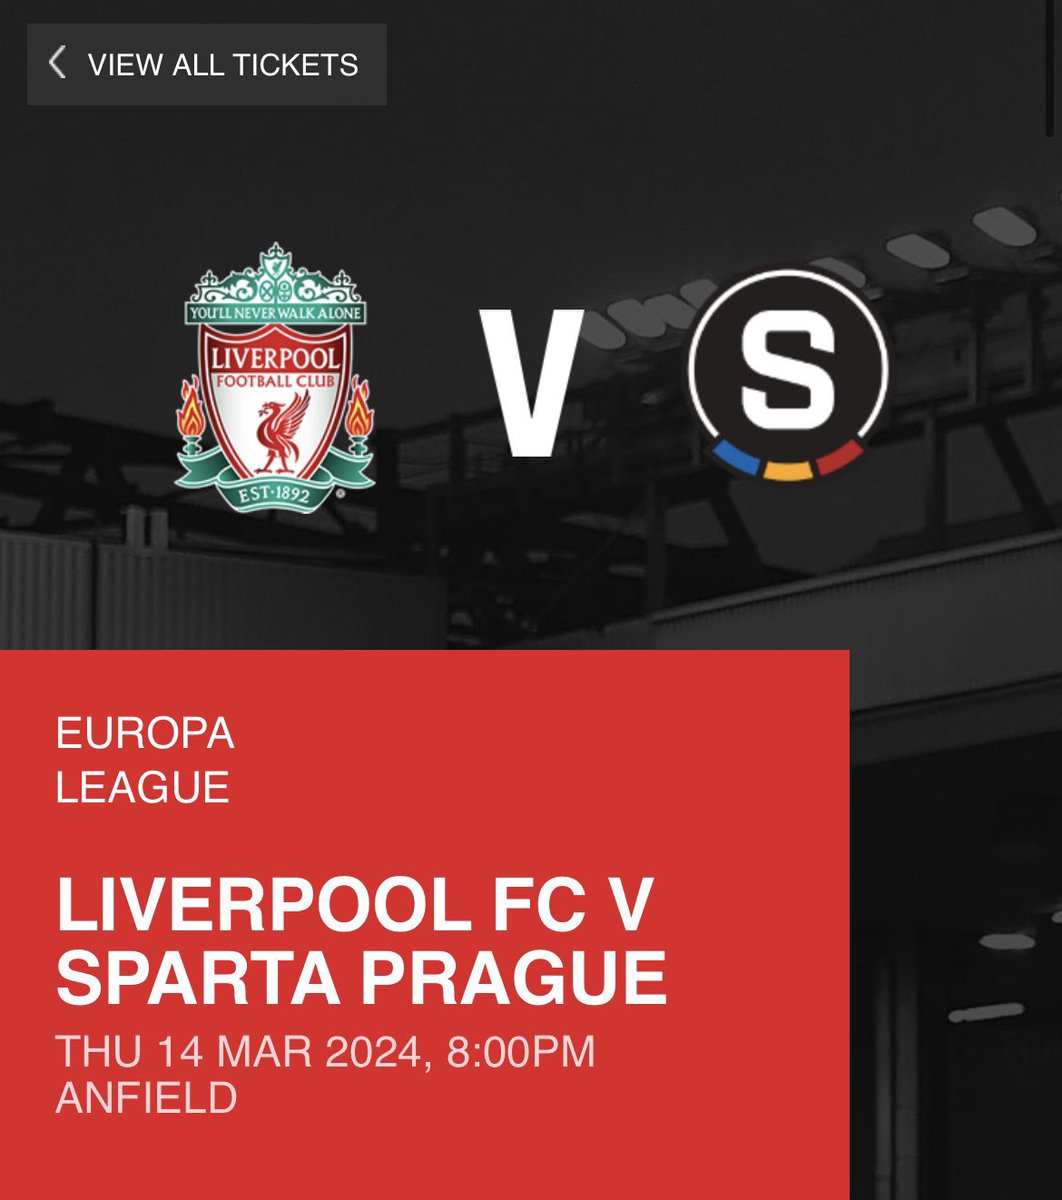 Liverpool v Sparta Prague

Pairs and Quads Available

DM

#LFCTickets #LFCSpares